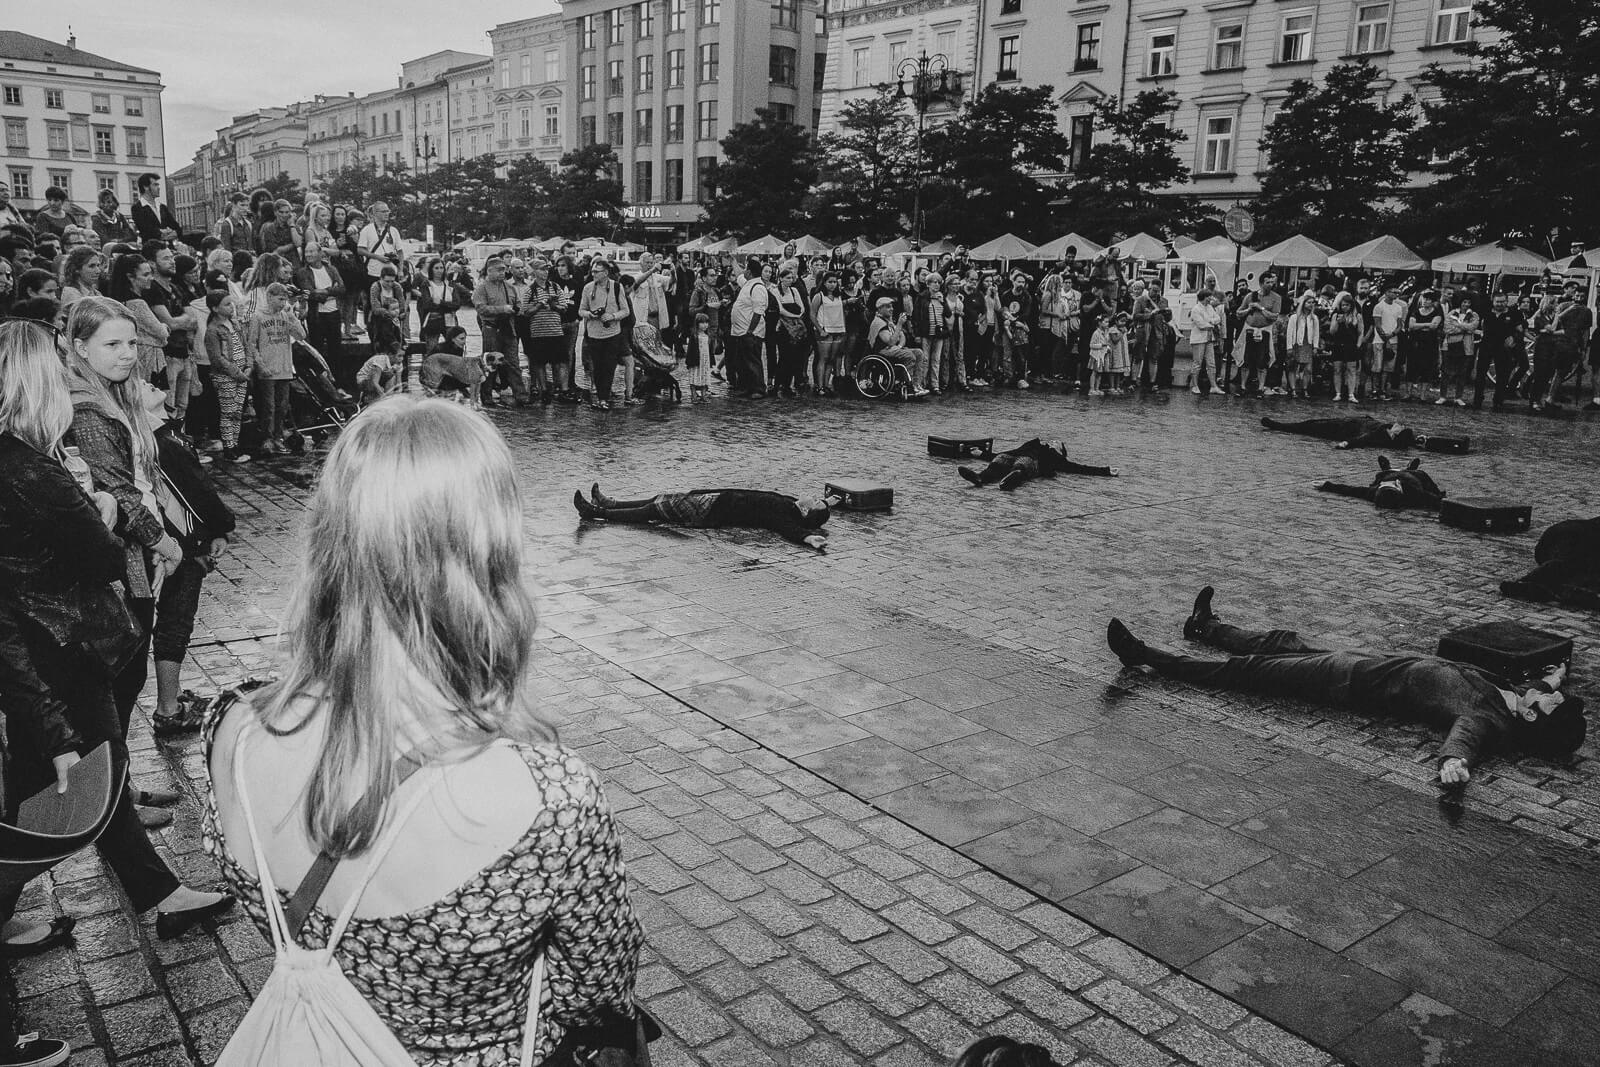 picture of Actors from Kamchatka theater group during a play in the Main Market Square in Krakow, Poland, 11